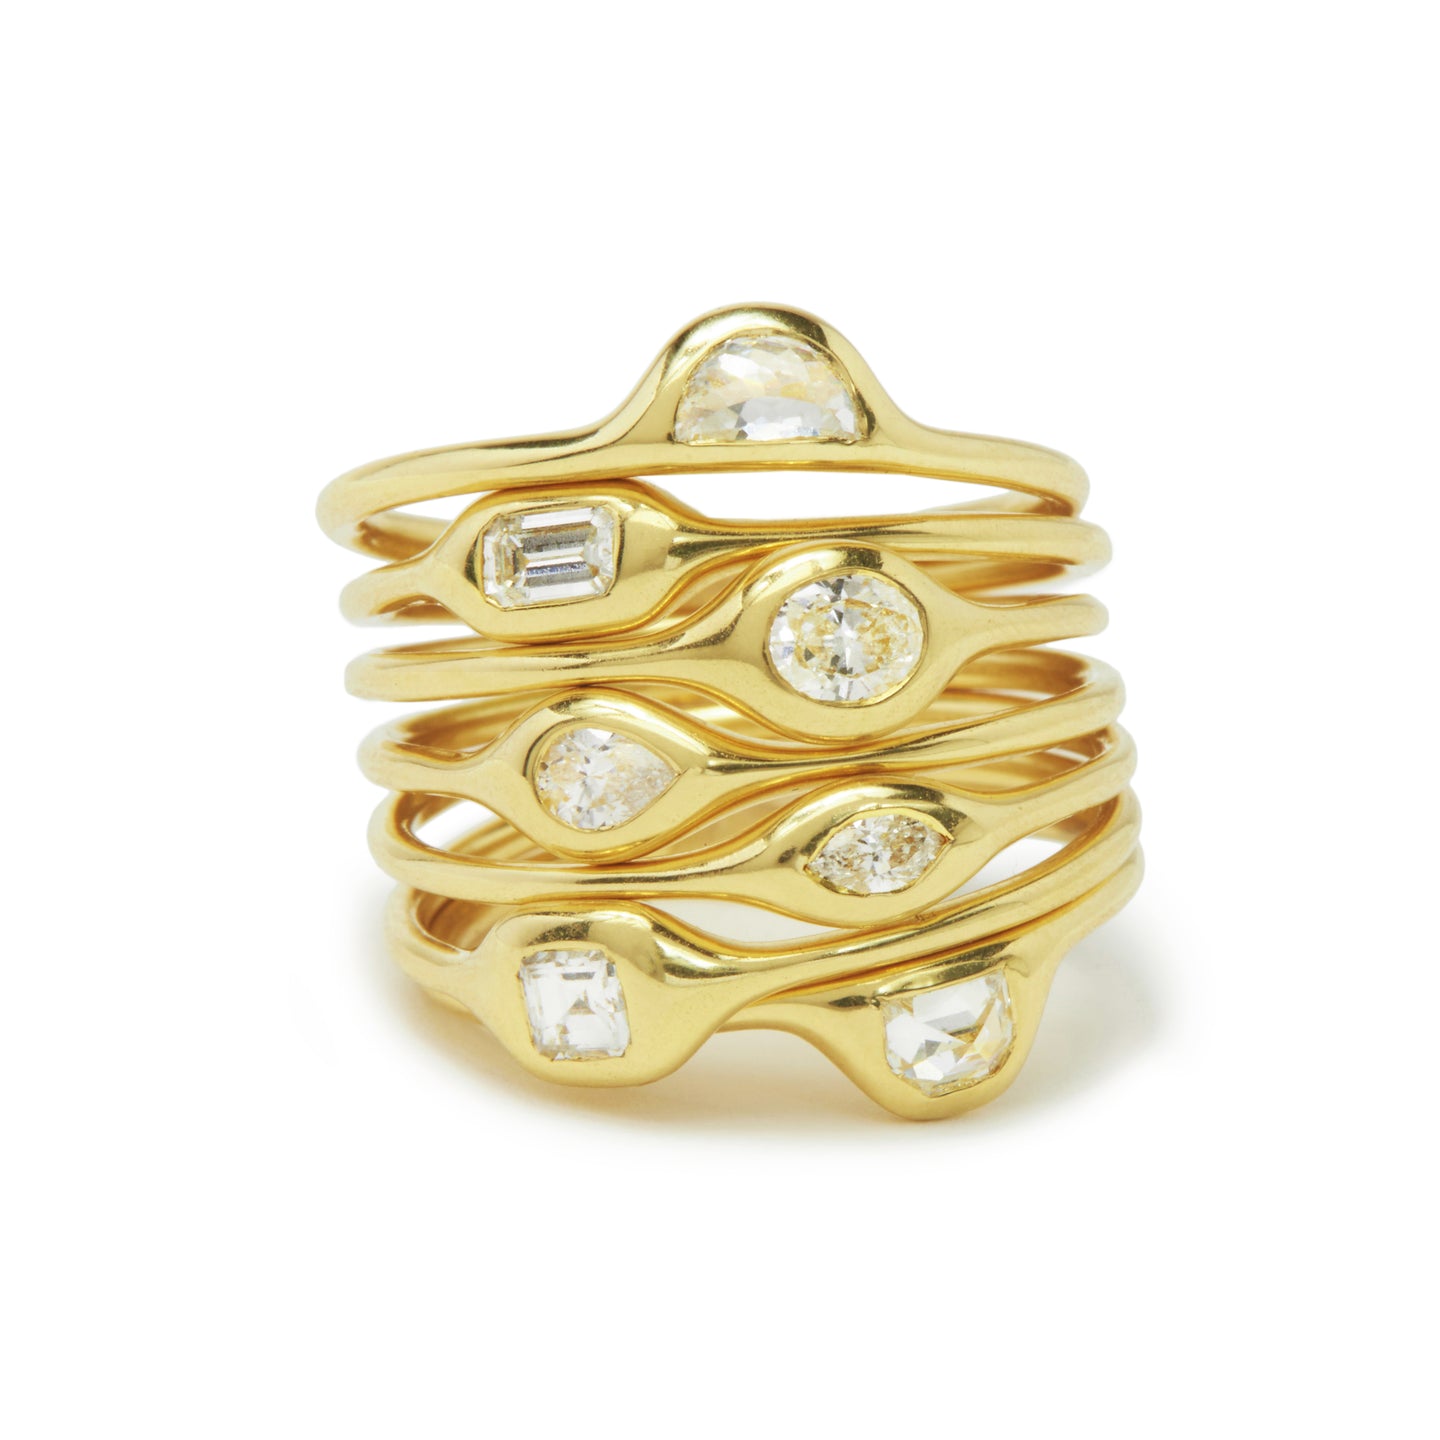 ring stack featuring 7 18k gold rings with diamond shapes - halfmoon, emerald cut, oval, pear, marquise, ascher